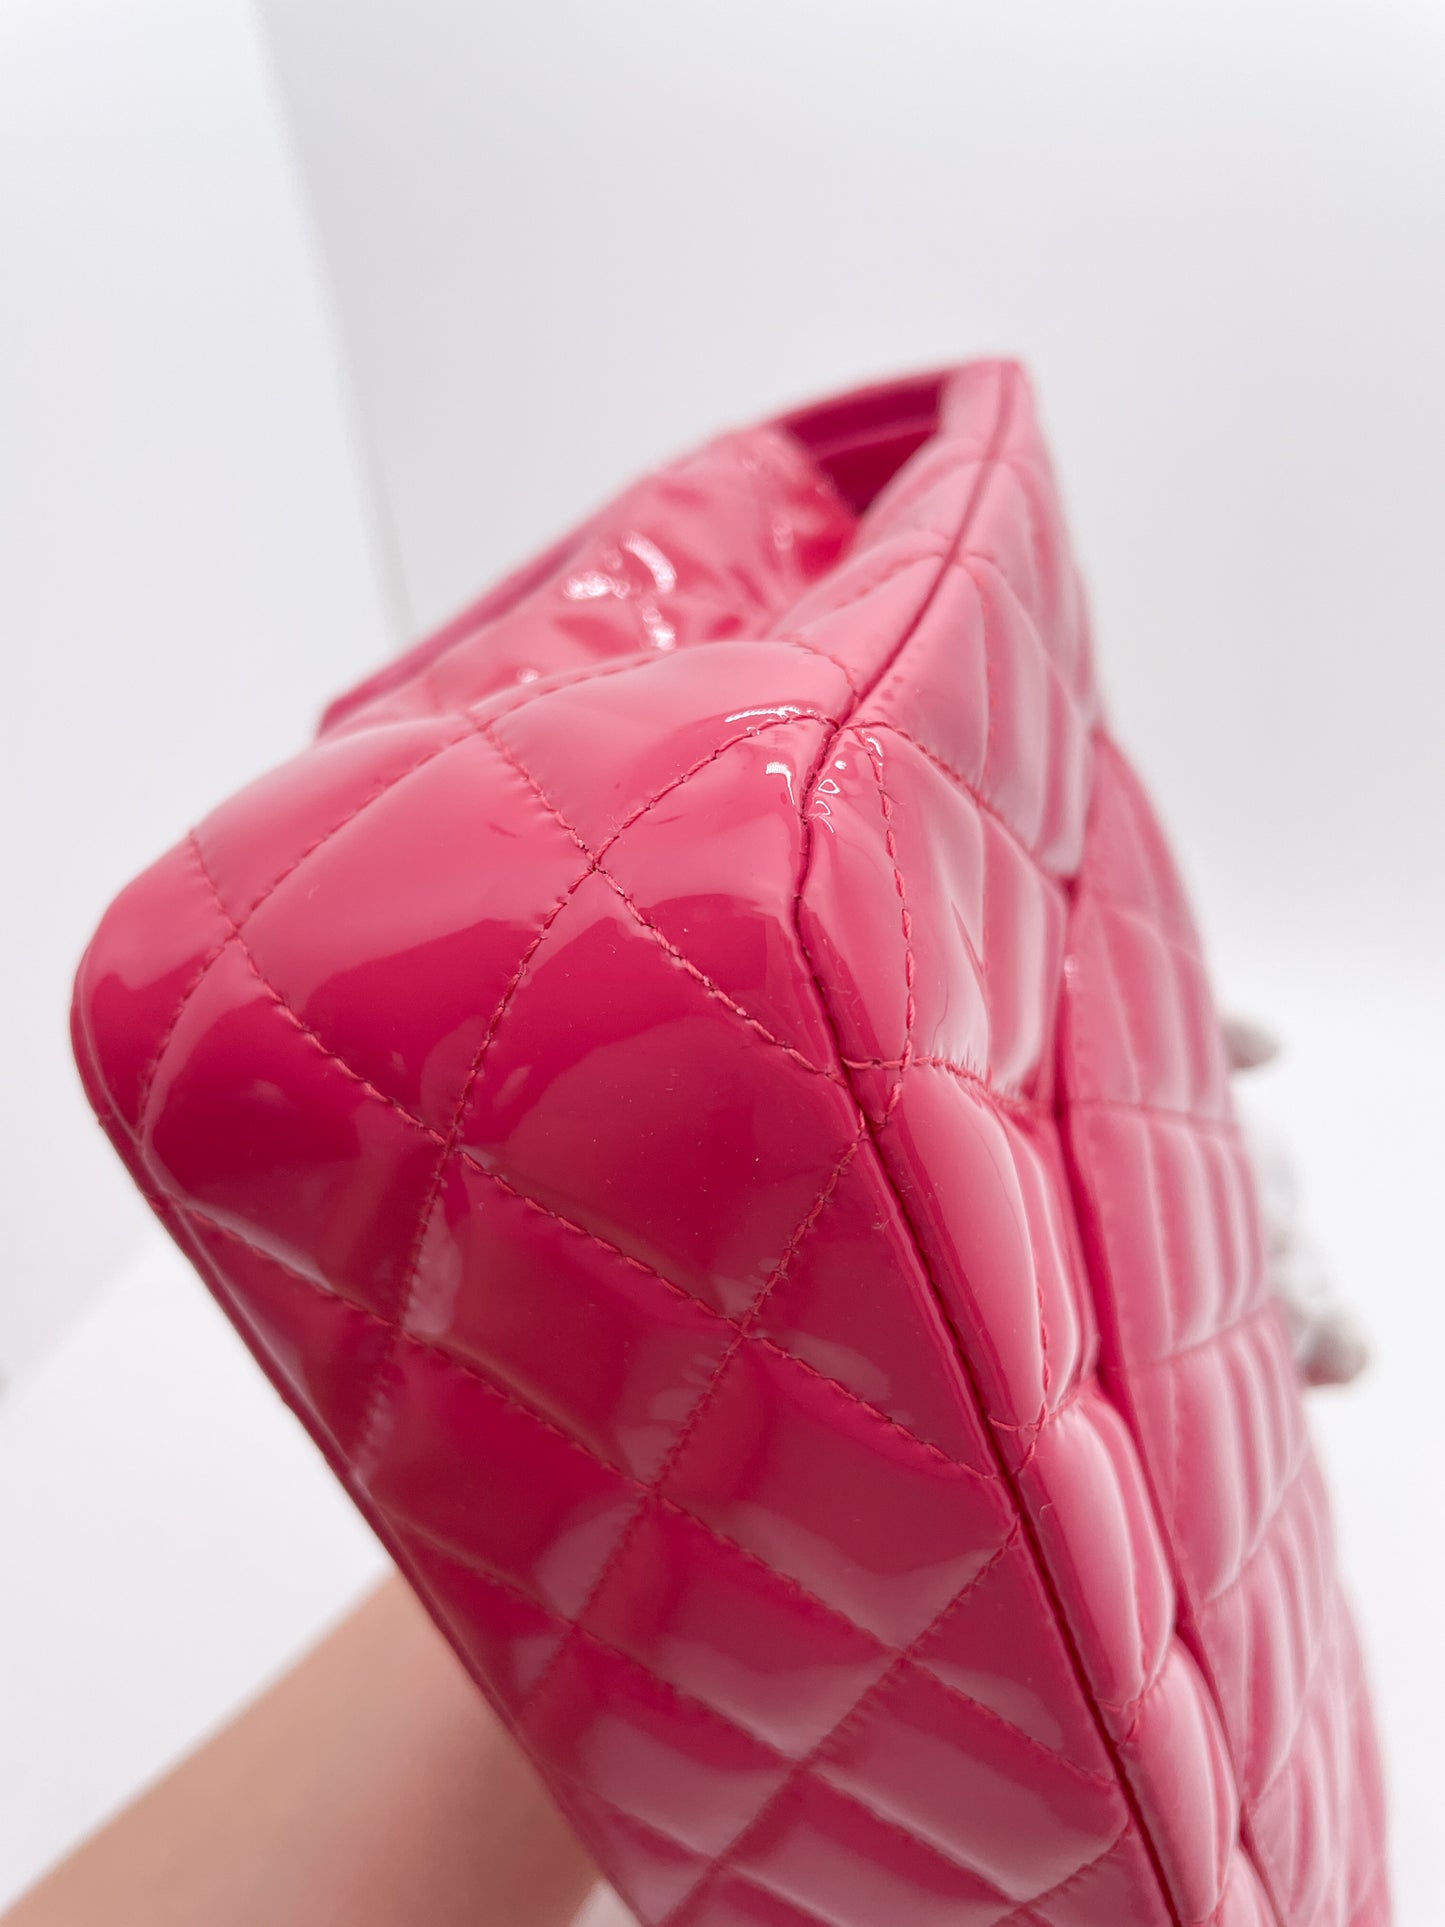 CHANEL CLASSIC FLAP PINK PATENT LEATHER